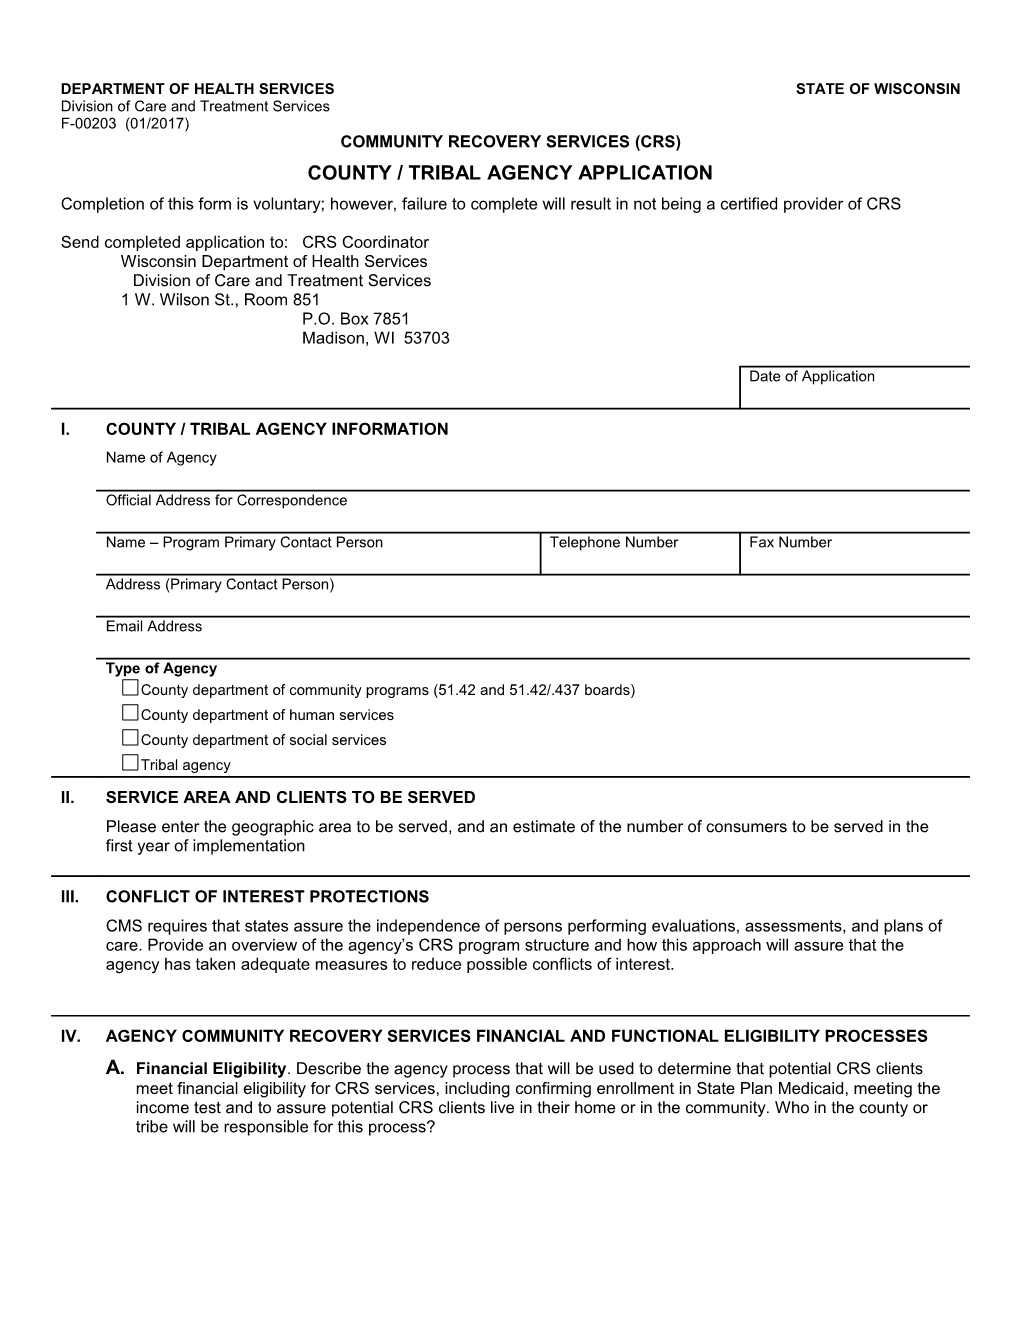 Community Recovery Services (CRS) - County / Tribal Agency Application